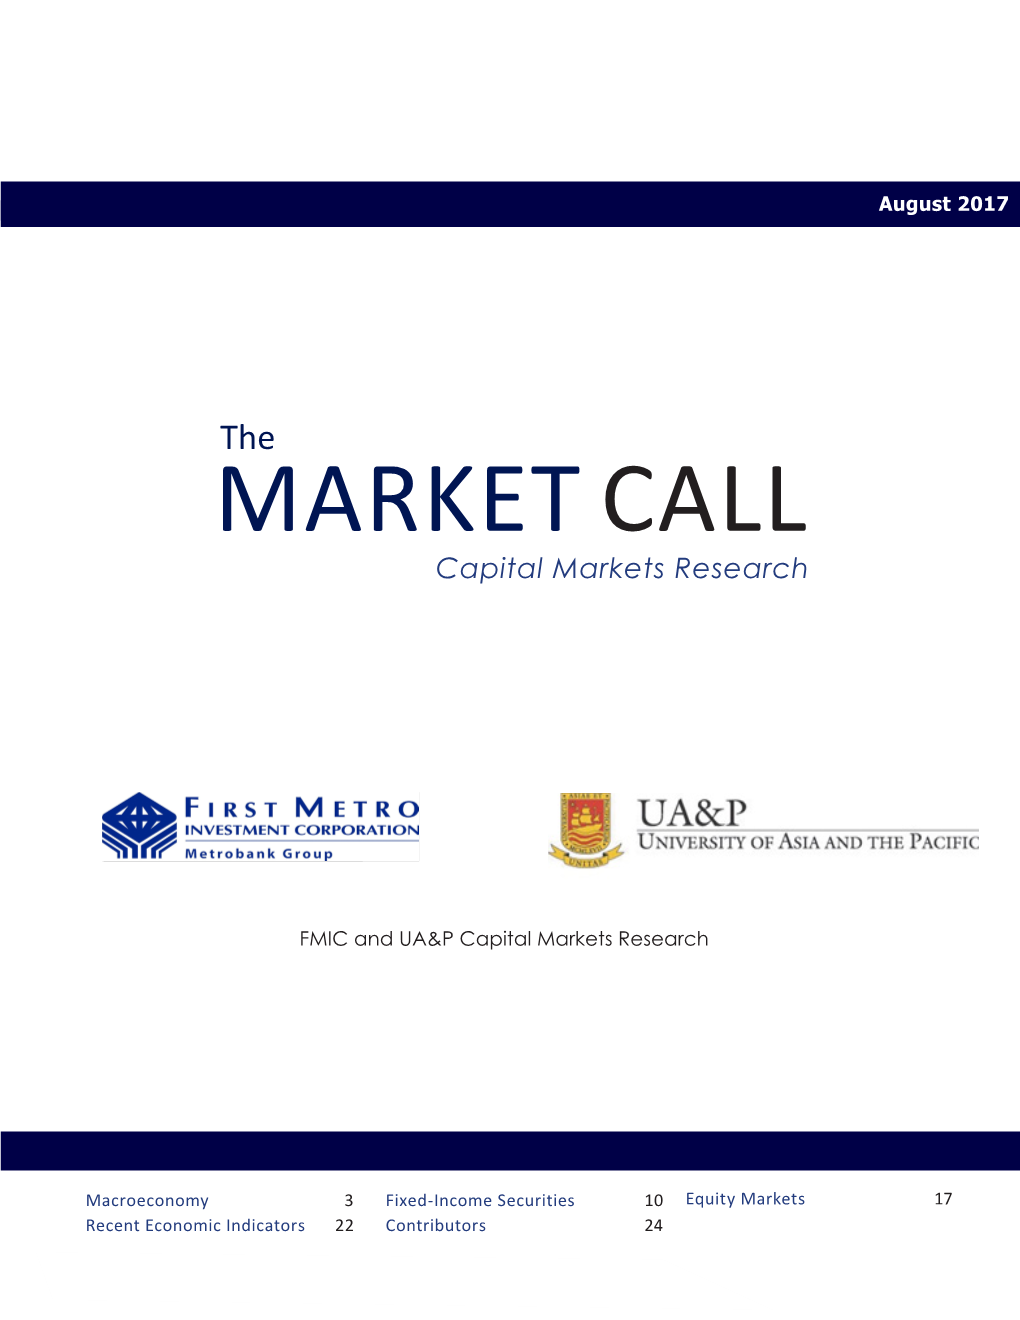 MARKET CALL Capital Markets Research